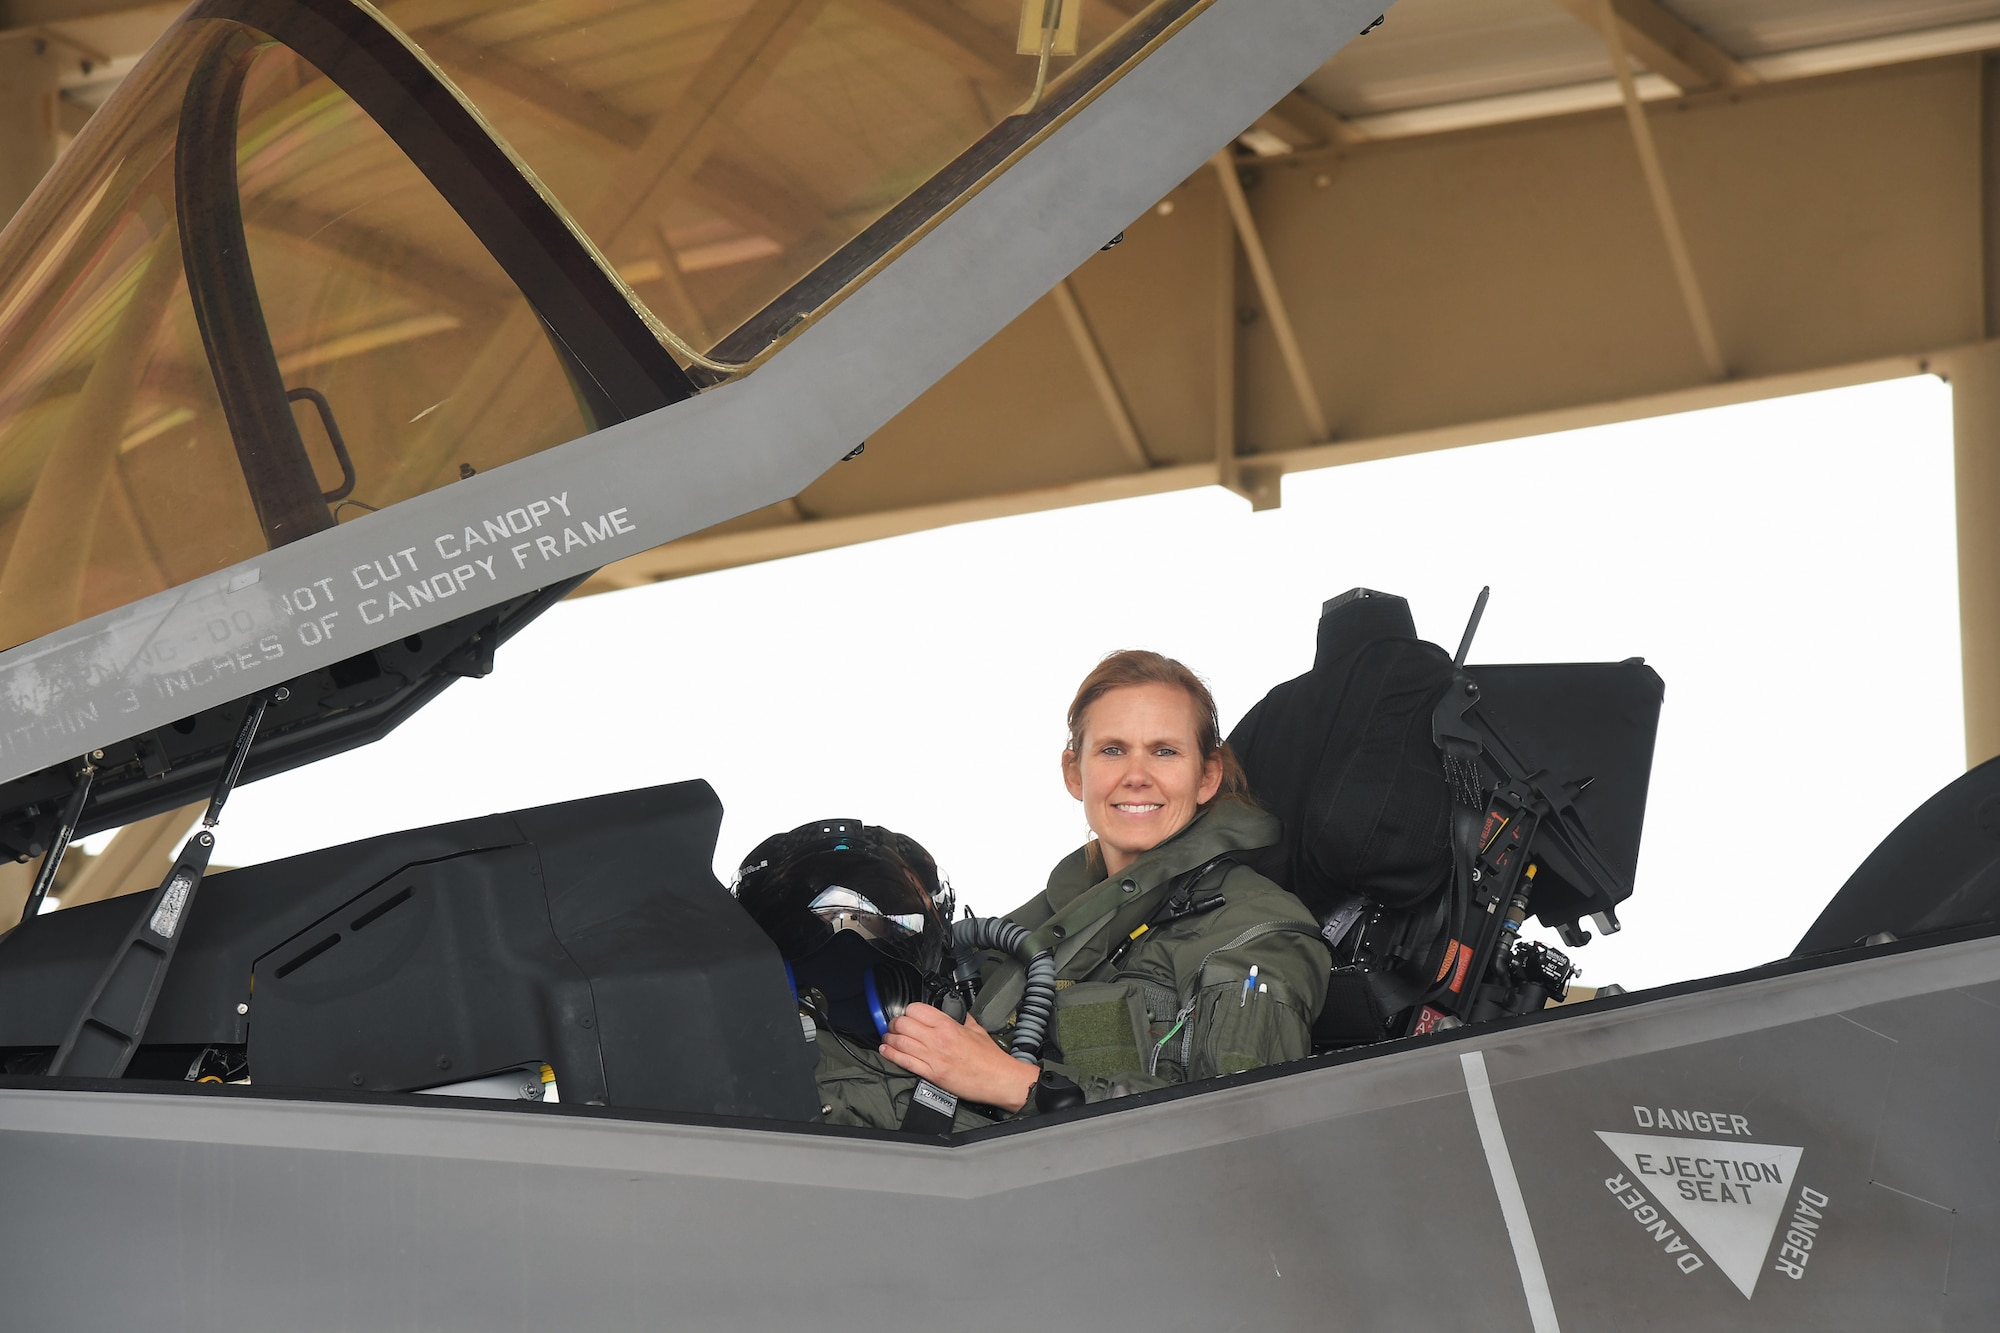 Col. Gina "Torch" Sabric, commander of the 419th Fighter Wing at Hill Air Force Base, Utah, and the Air Force Reserve's first female F-35 pilot